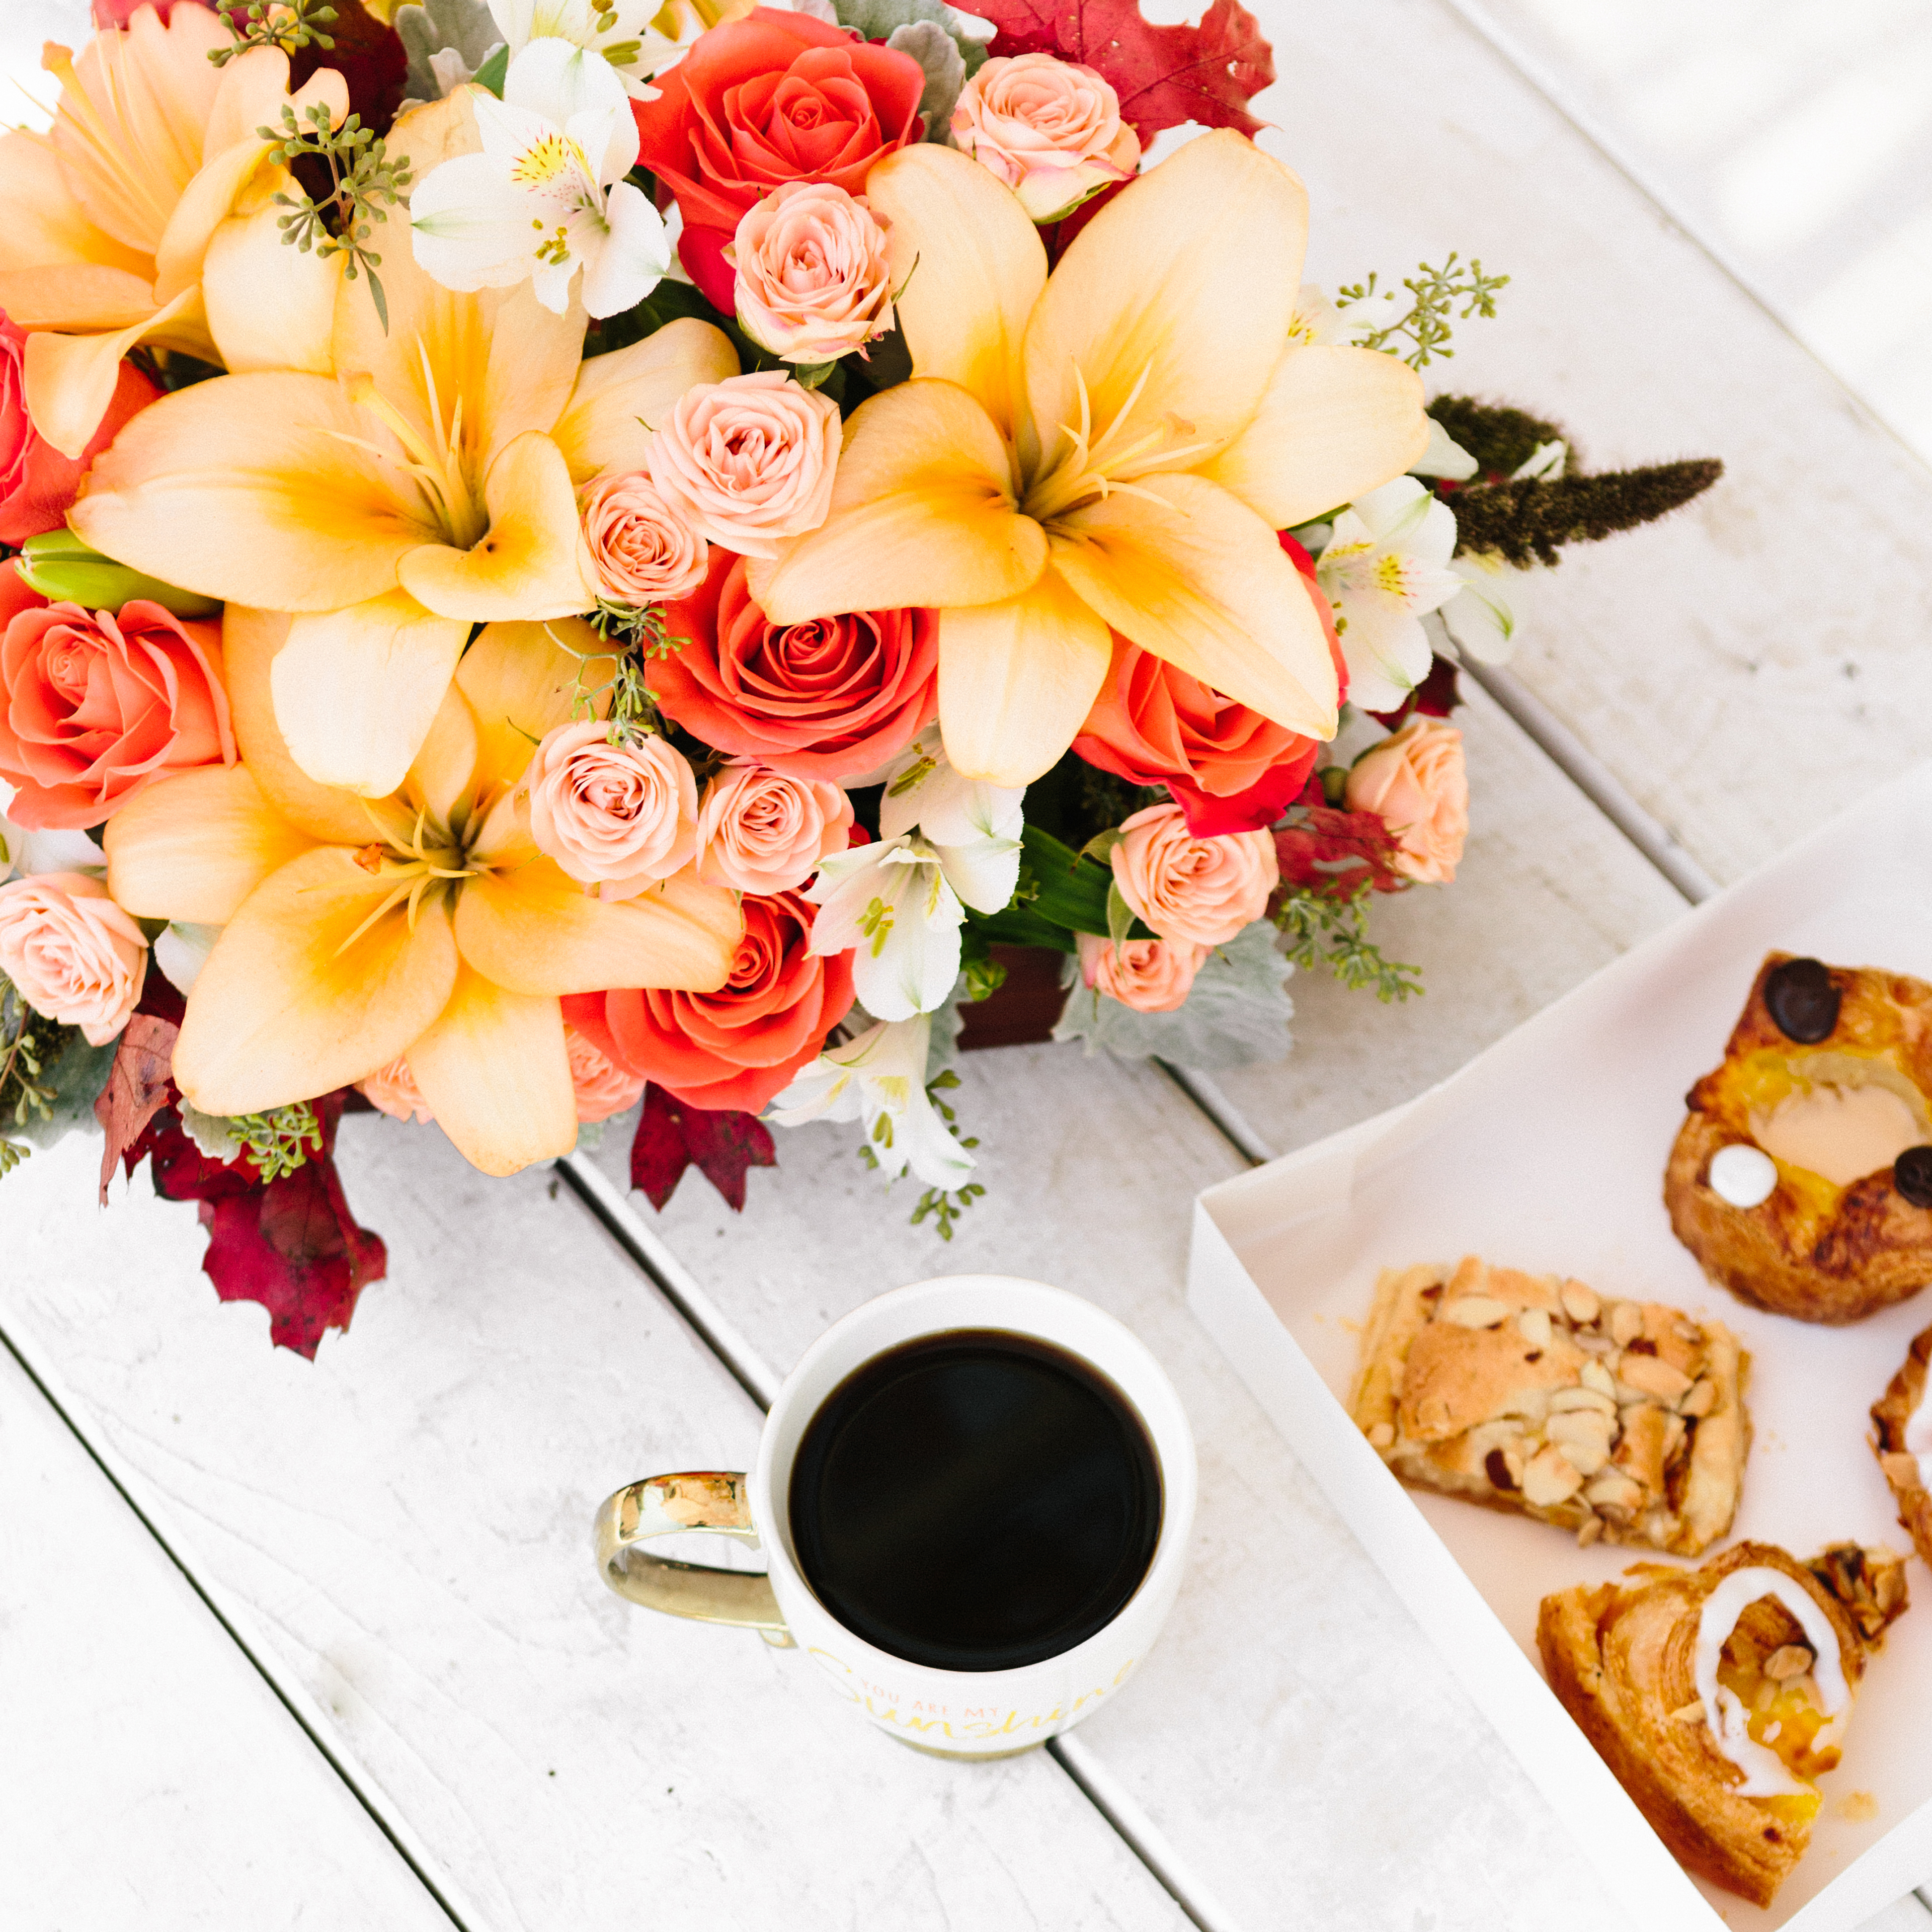 Orange lilies and roses on table with coffee and pastries